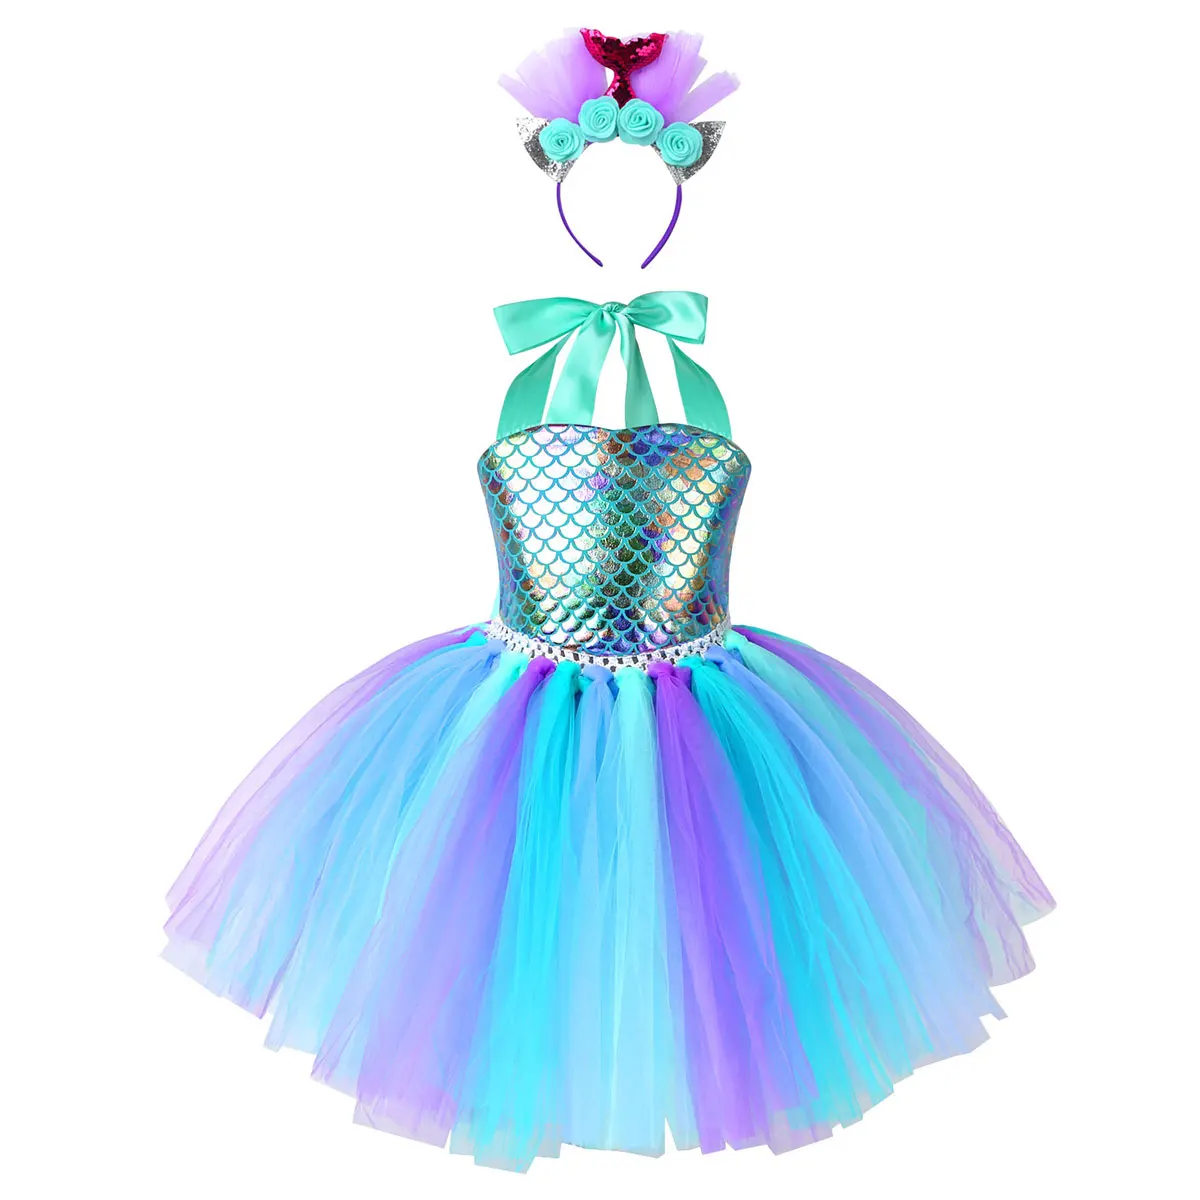 New Kids Girls Cosplay Carnival Party Dress Prom Vestidos Toddlers Mermaid Costumes Dresses Kids Princess Prom Roleplay Dresses